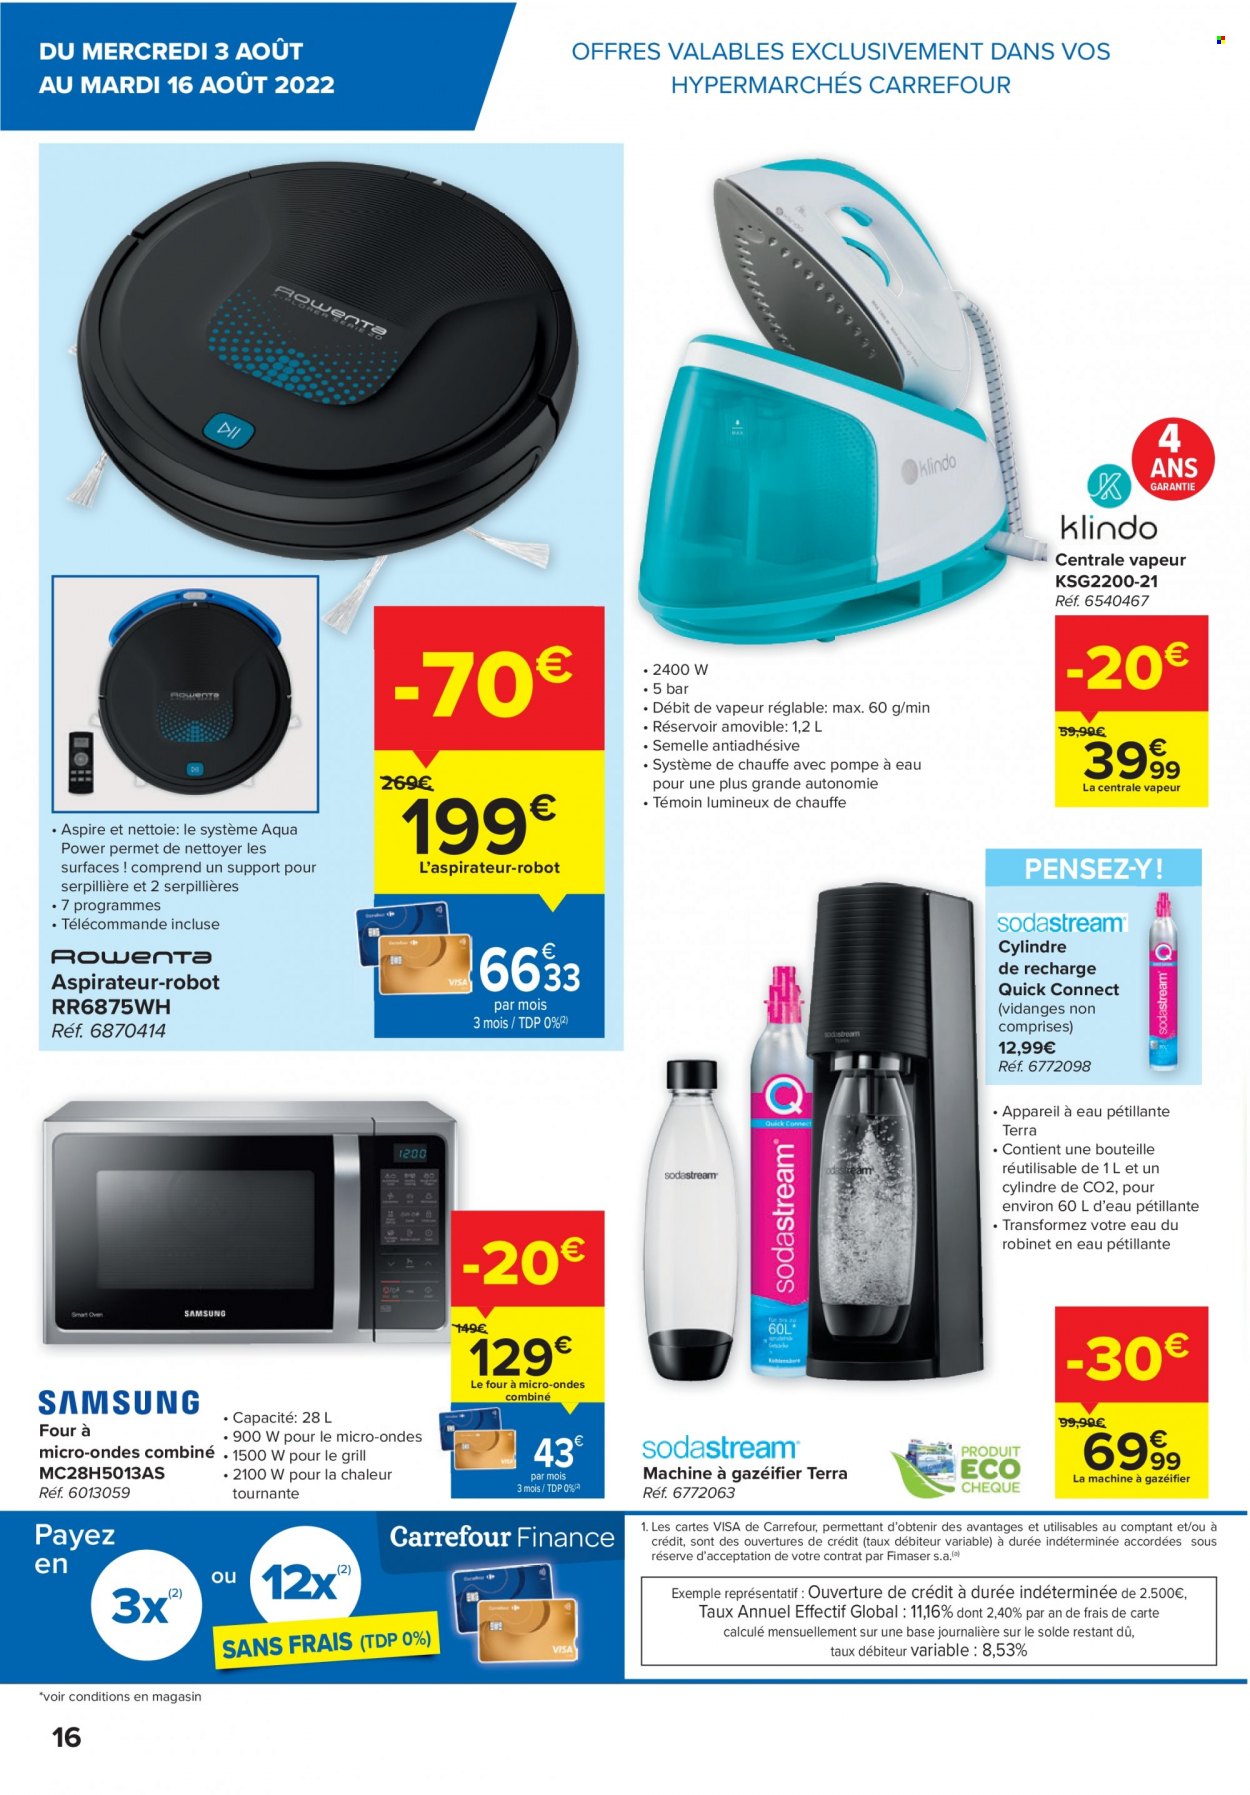 Catalogue Carrefour hypermarkt - 3.8.2022 - 16.8.2022. Page 16.